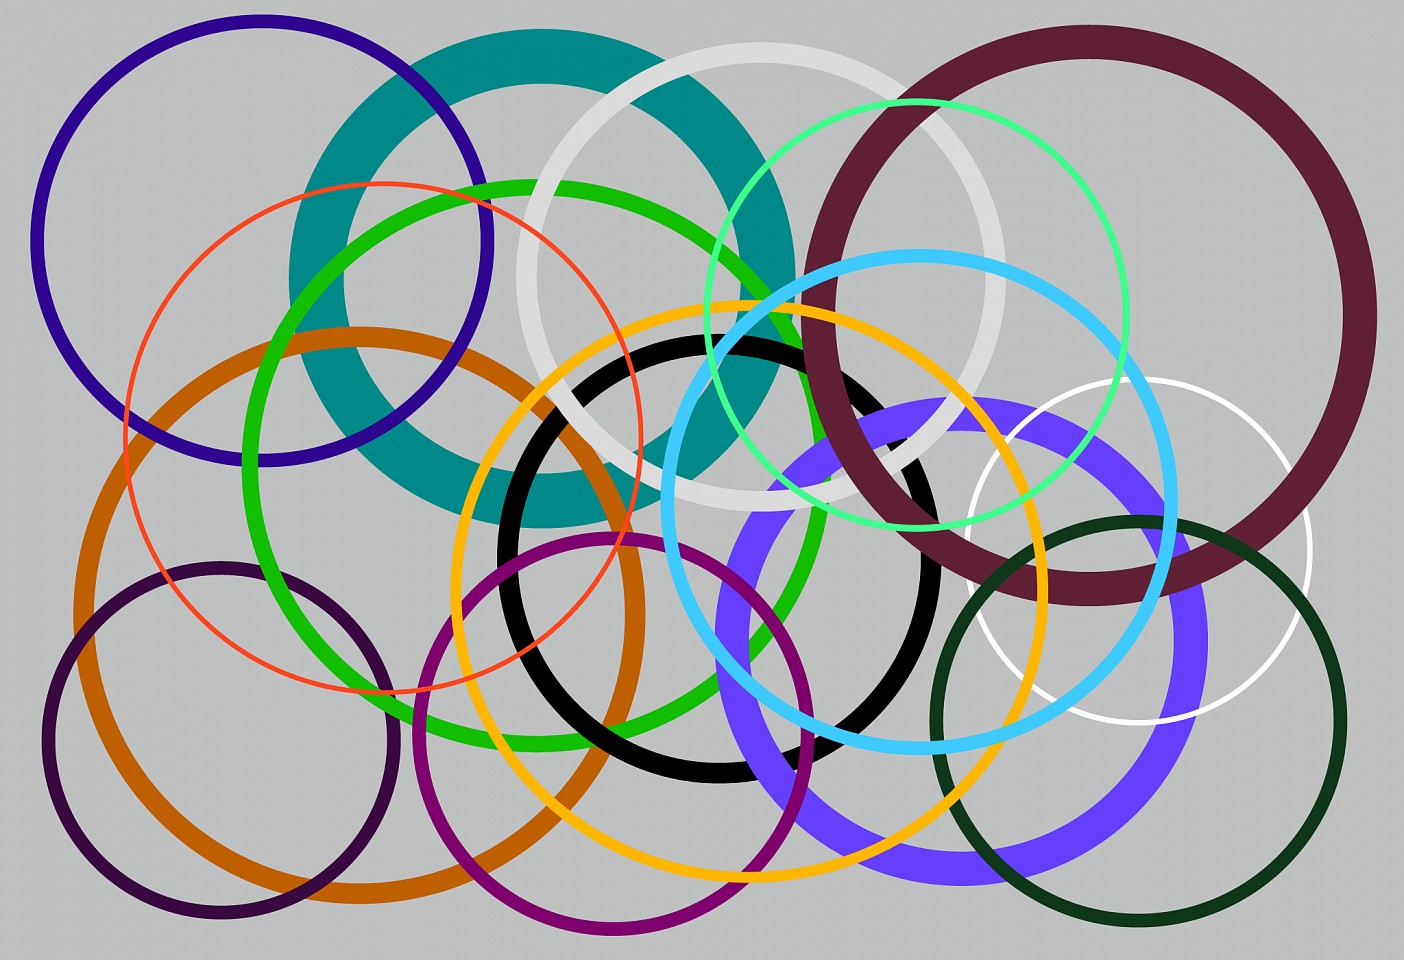 Dane Albert, Circles #47 Dusk, 2023
Acrylic on canvas (Concept), 48 x 72 in. (121.9 x 182.9 cm)
Series of colored lines and shapes in multiple configurations
DA.2023-047-dusk